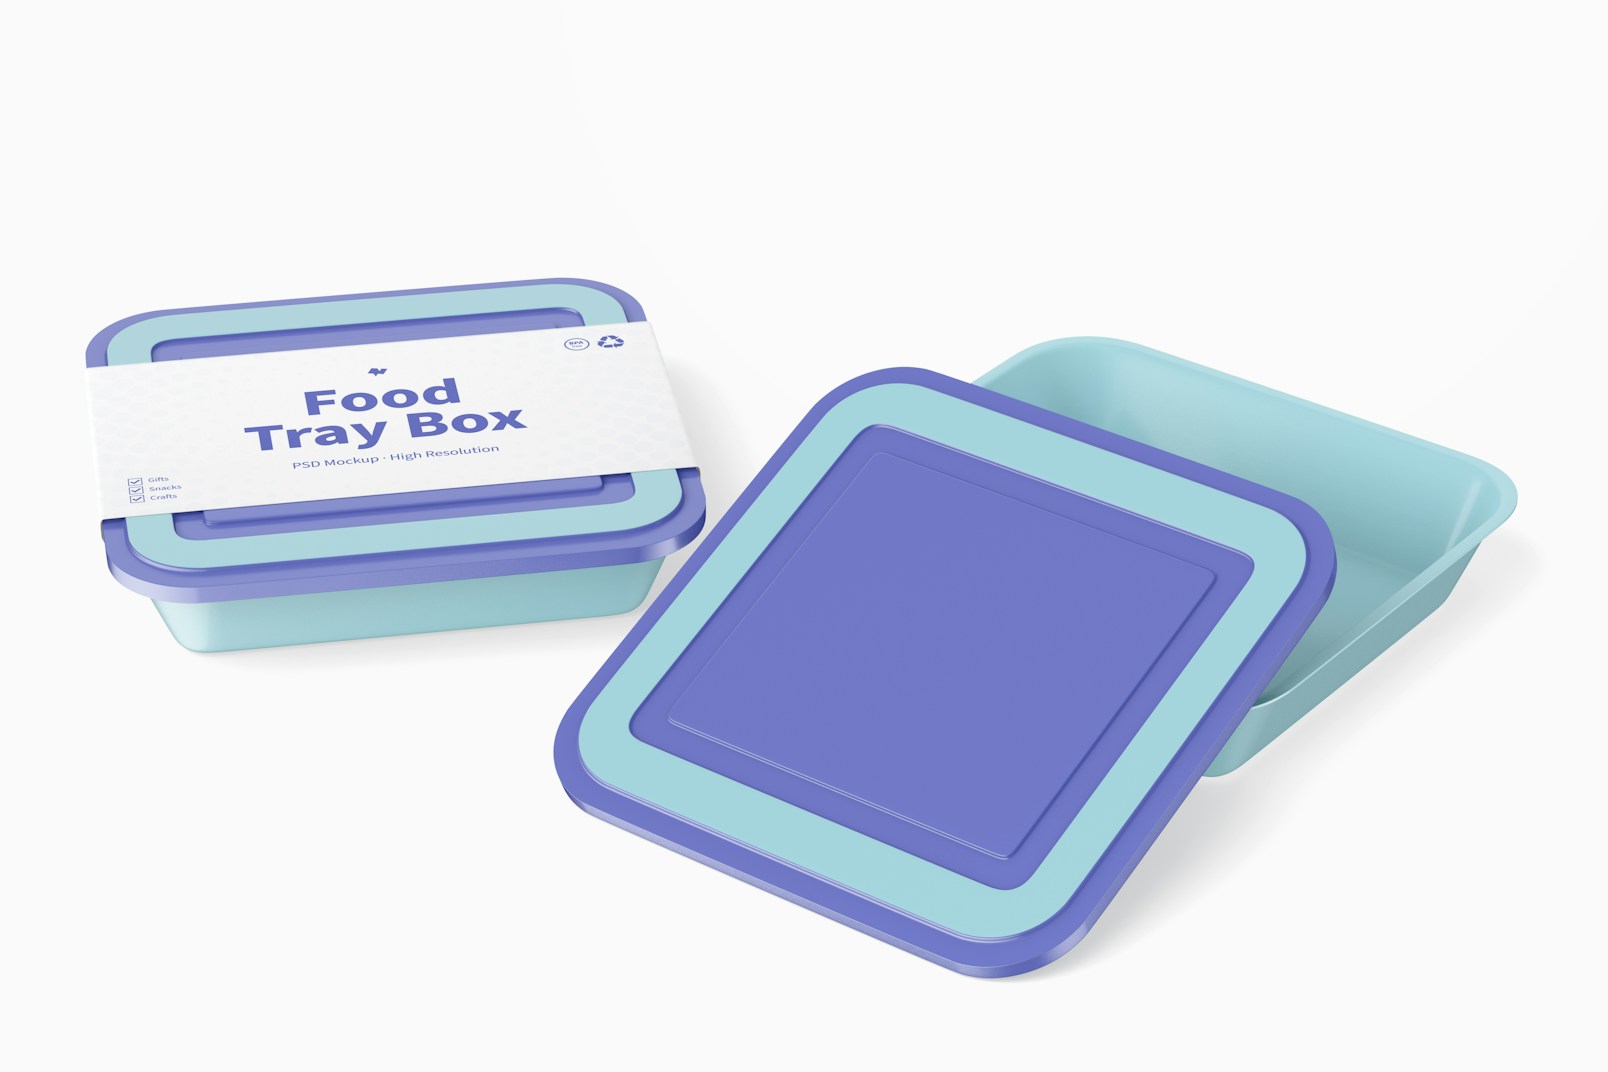 Food Tray Boxes with Lid Mockup, Opened and Closed